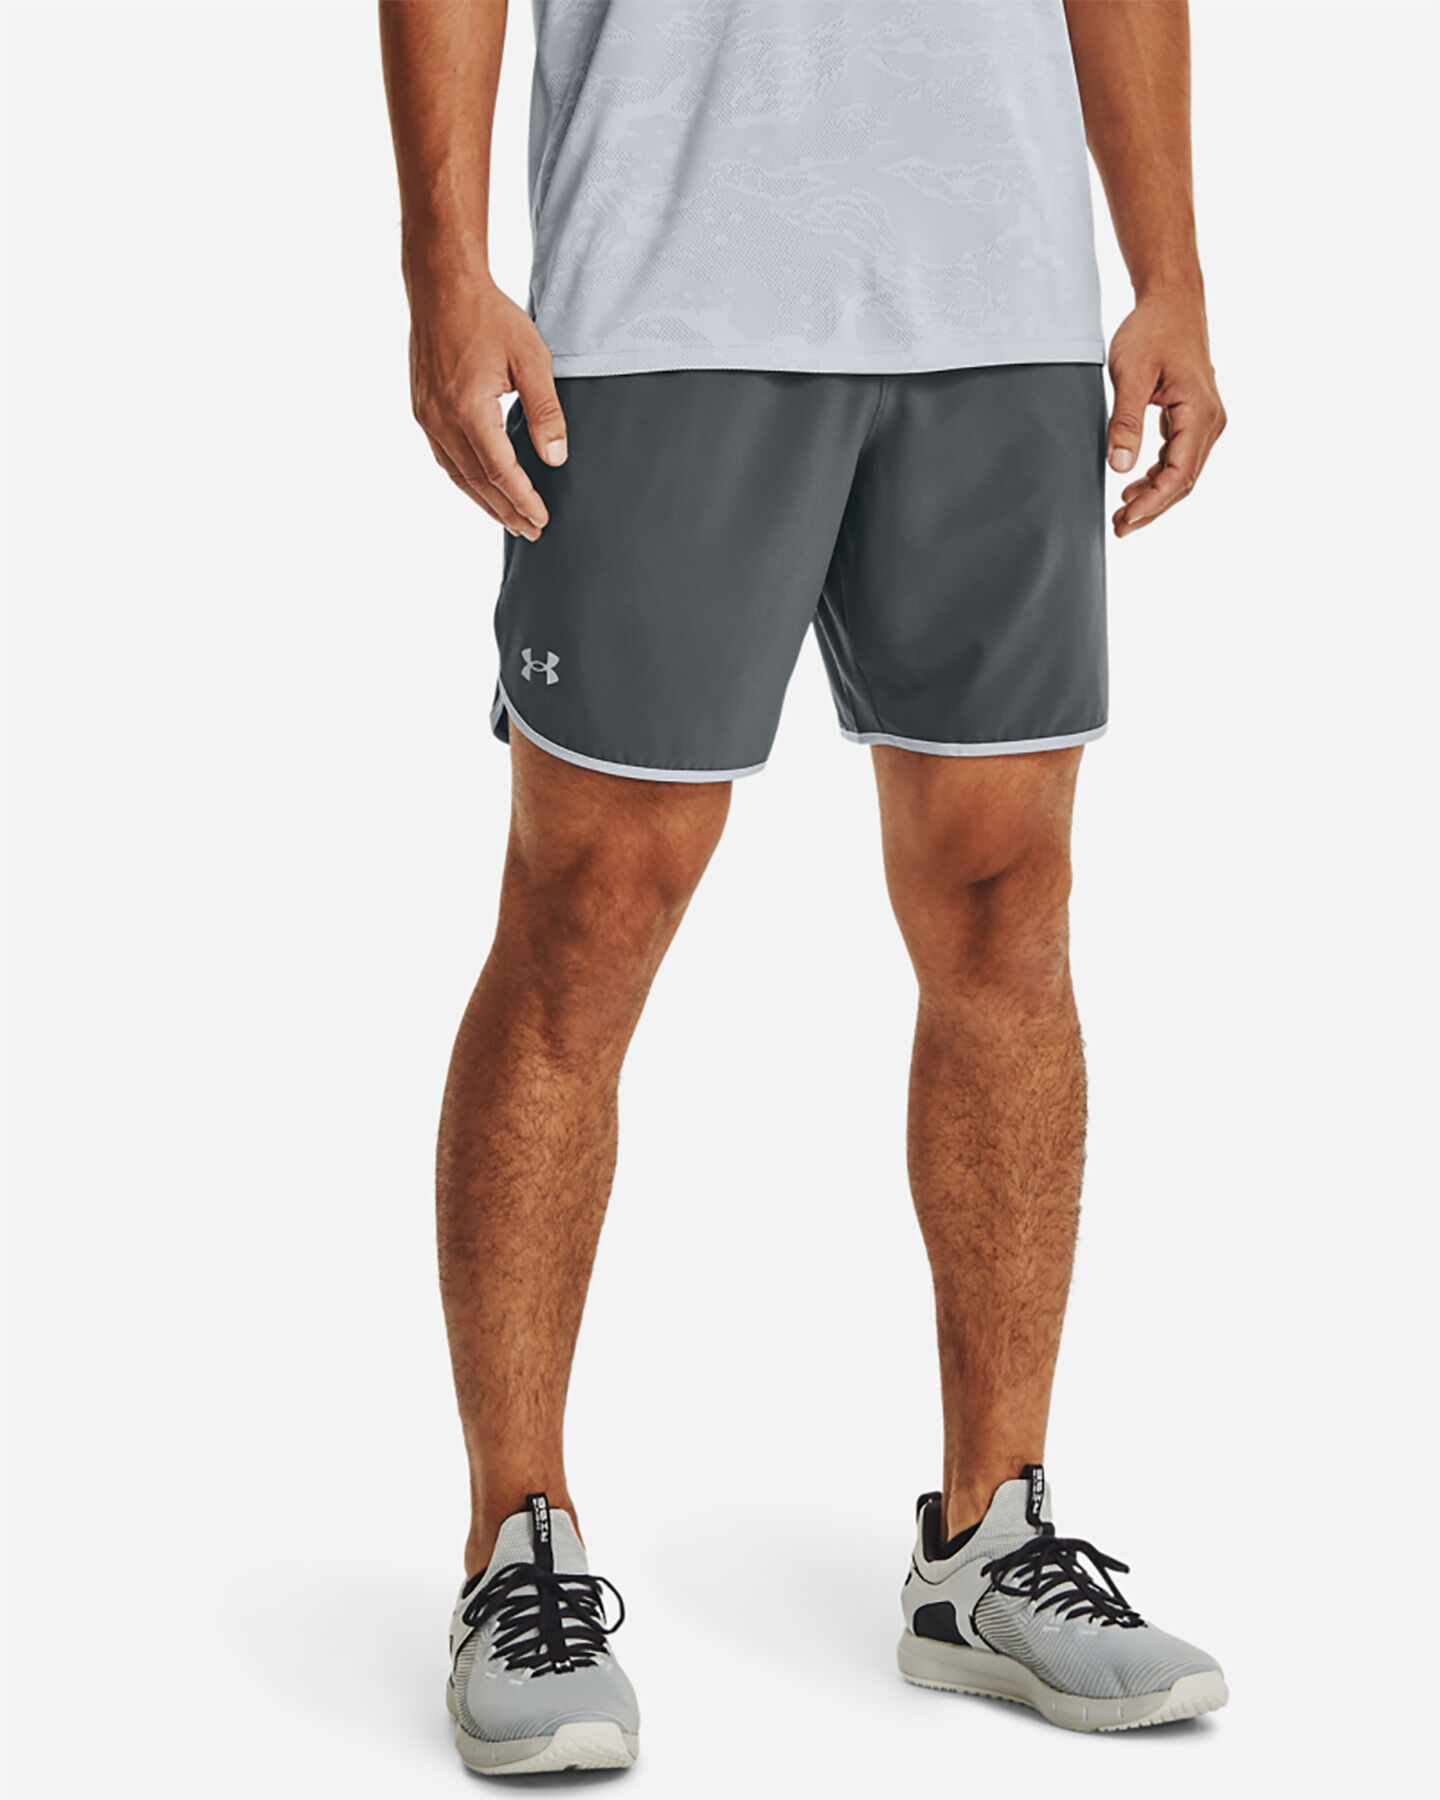  Pantalone training UNDER ARMOUR HIIT WOVEN M S5287183|0012|SM scatto 2